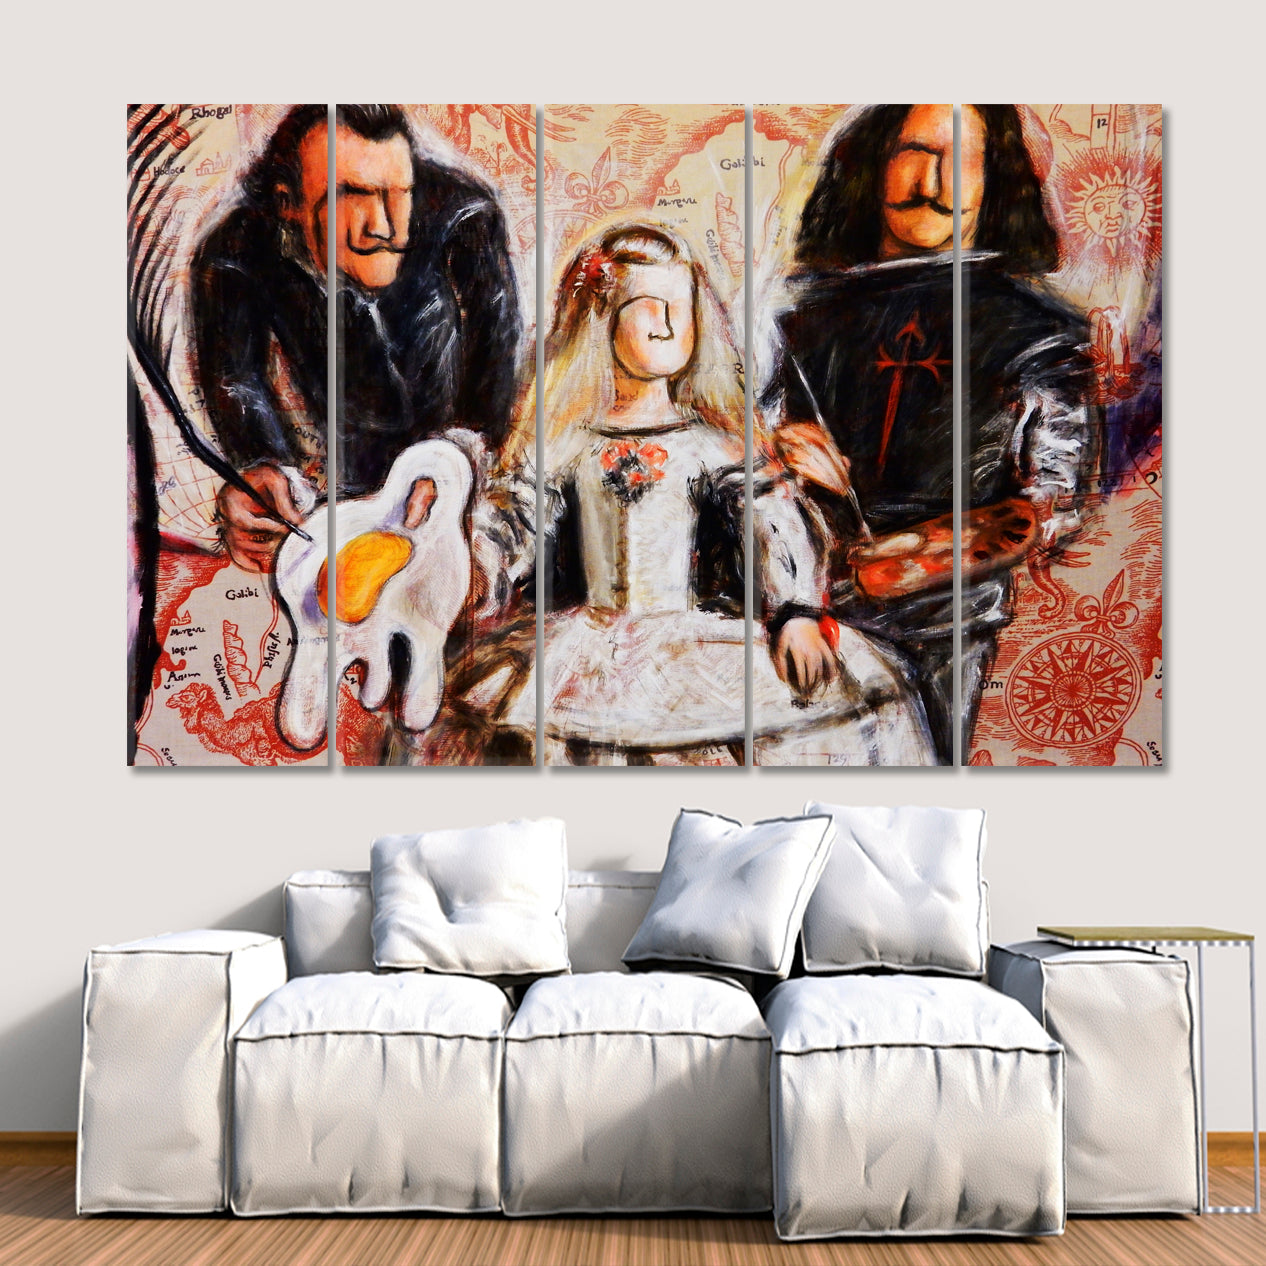 Salvador Dali Unique Style Surreal Abstract Abstract Art Print Artesty 5 panels 36" x 24" 